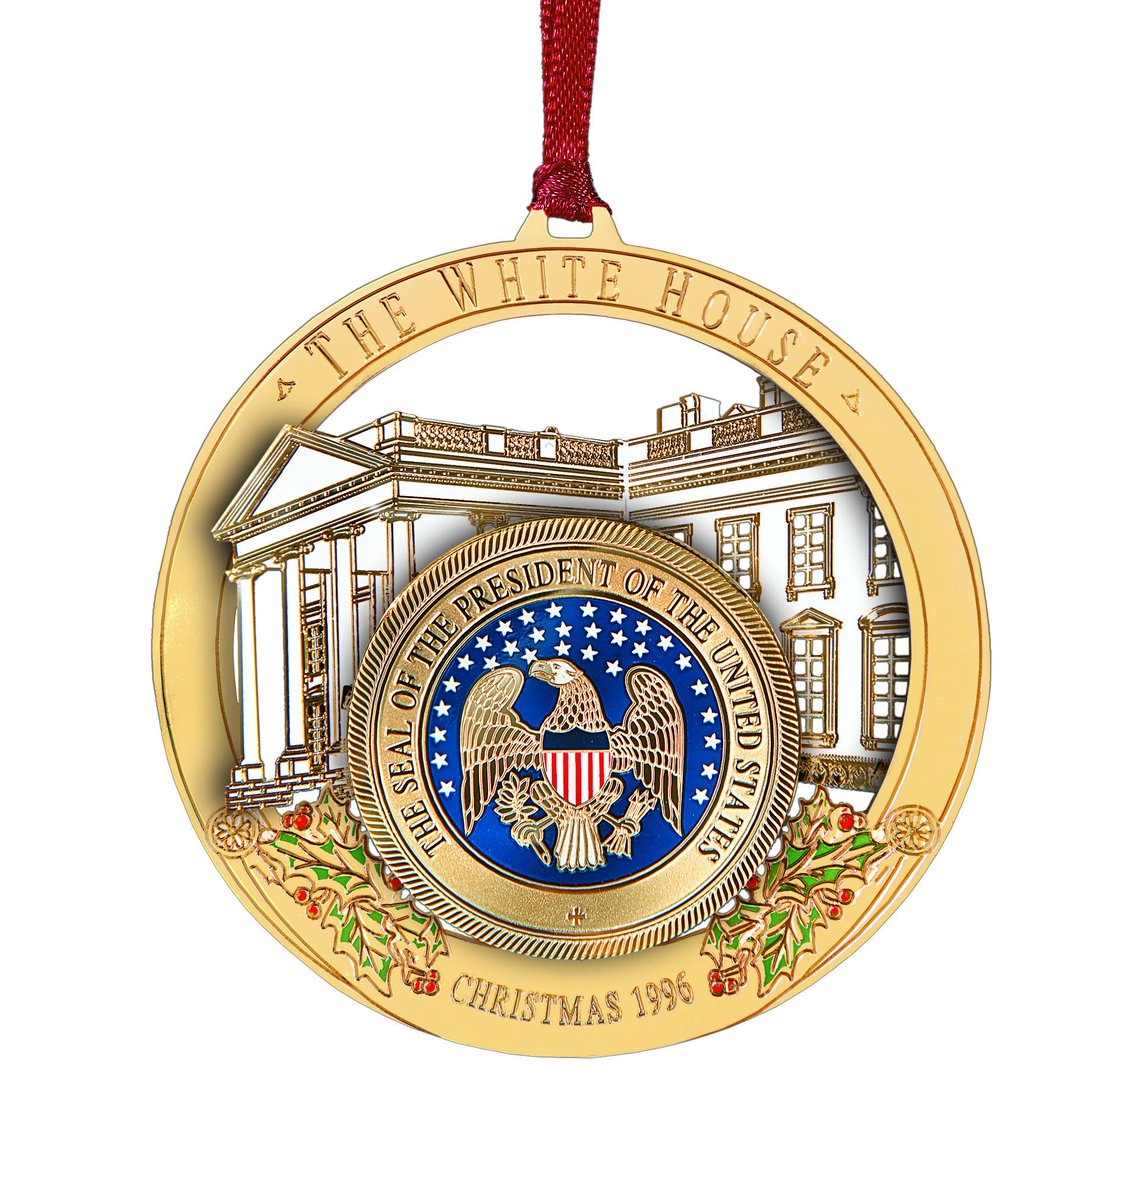 The earliest documented Presidential Seal was sketched by President Millard Fillmore – and appears on the 1996 Official White House Christmas Ornament that remembers the Fillmore administration. https://shop.whitehousehistory.org/holidays/ornaments/1994-to-1997-white-house-christmas-ornaments-sold-as-a-set-of-four